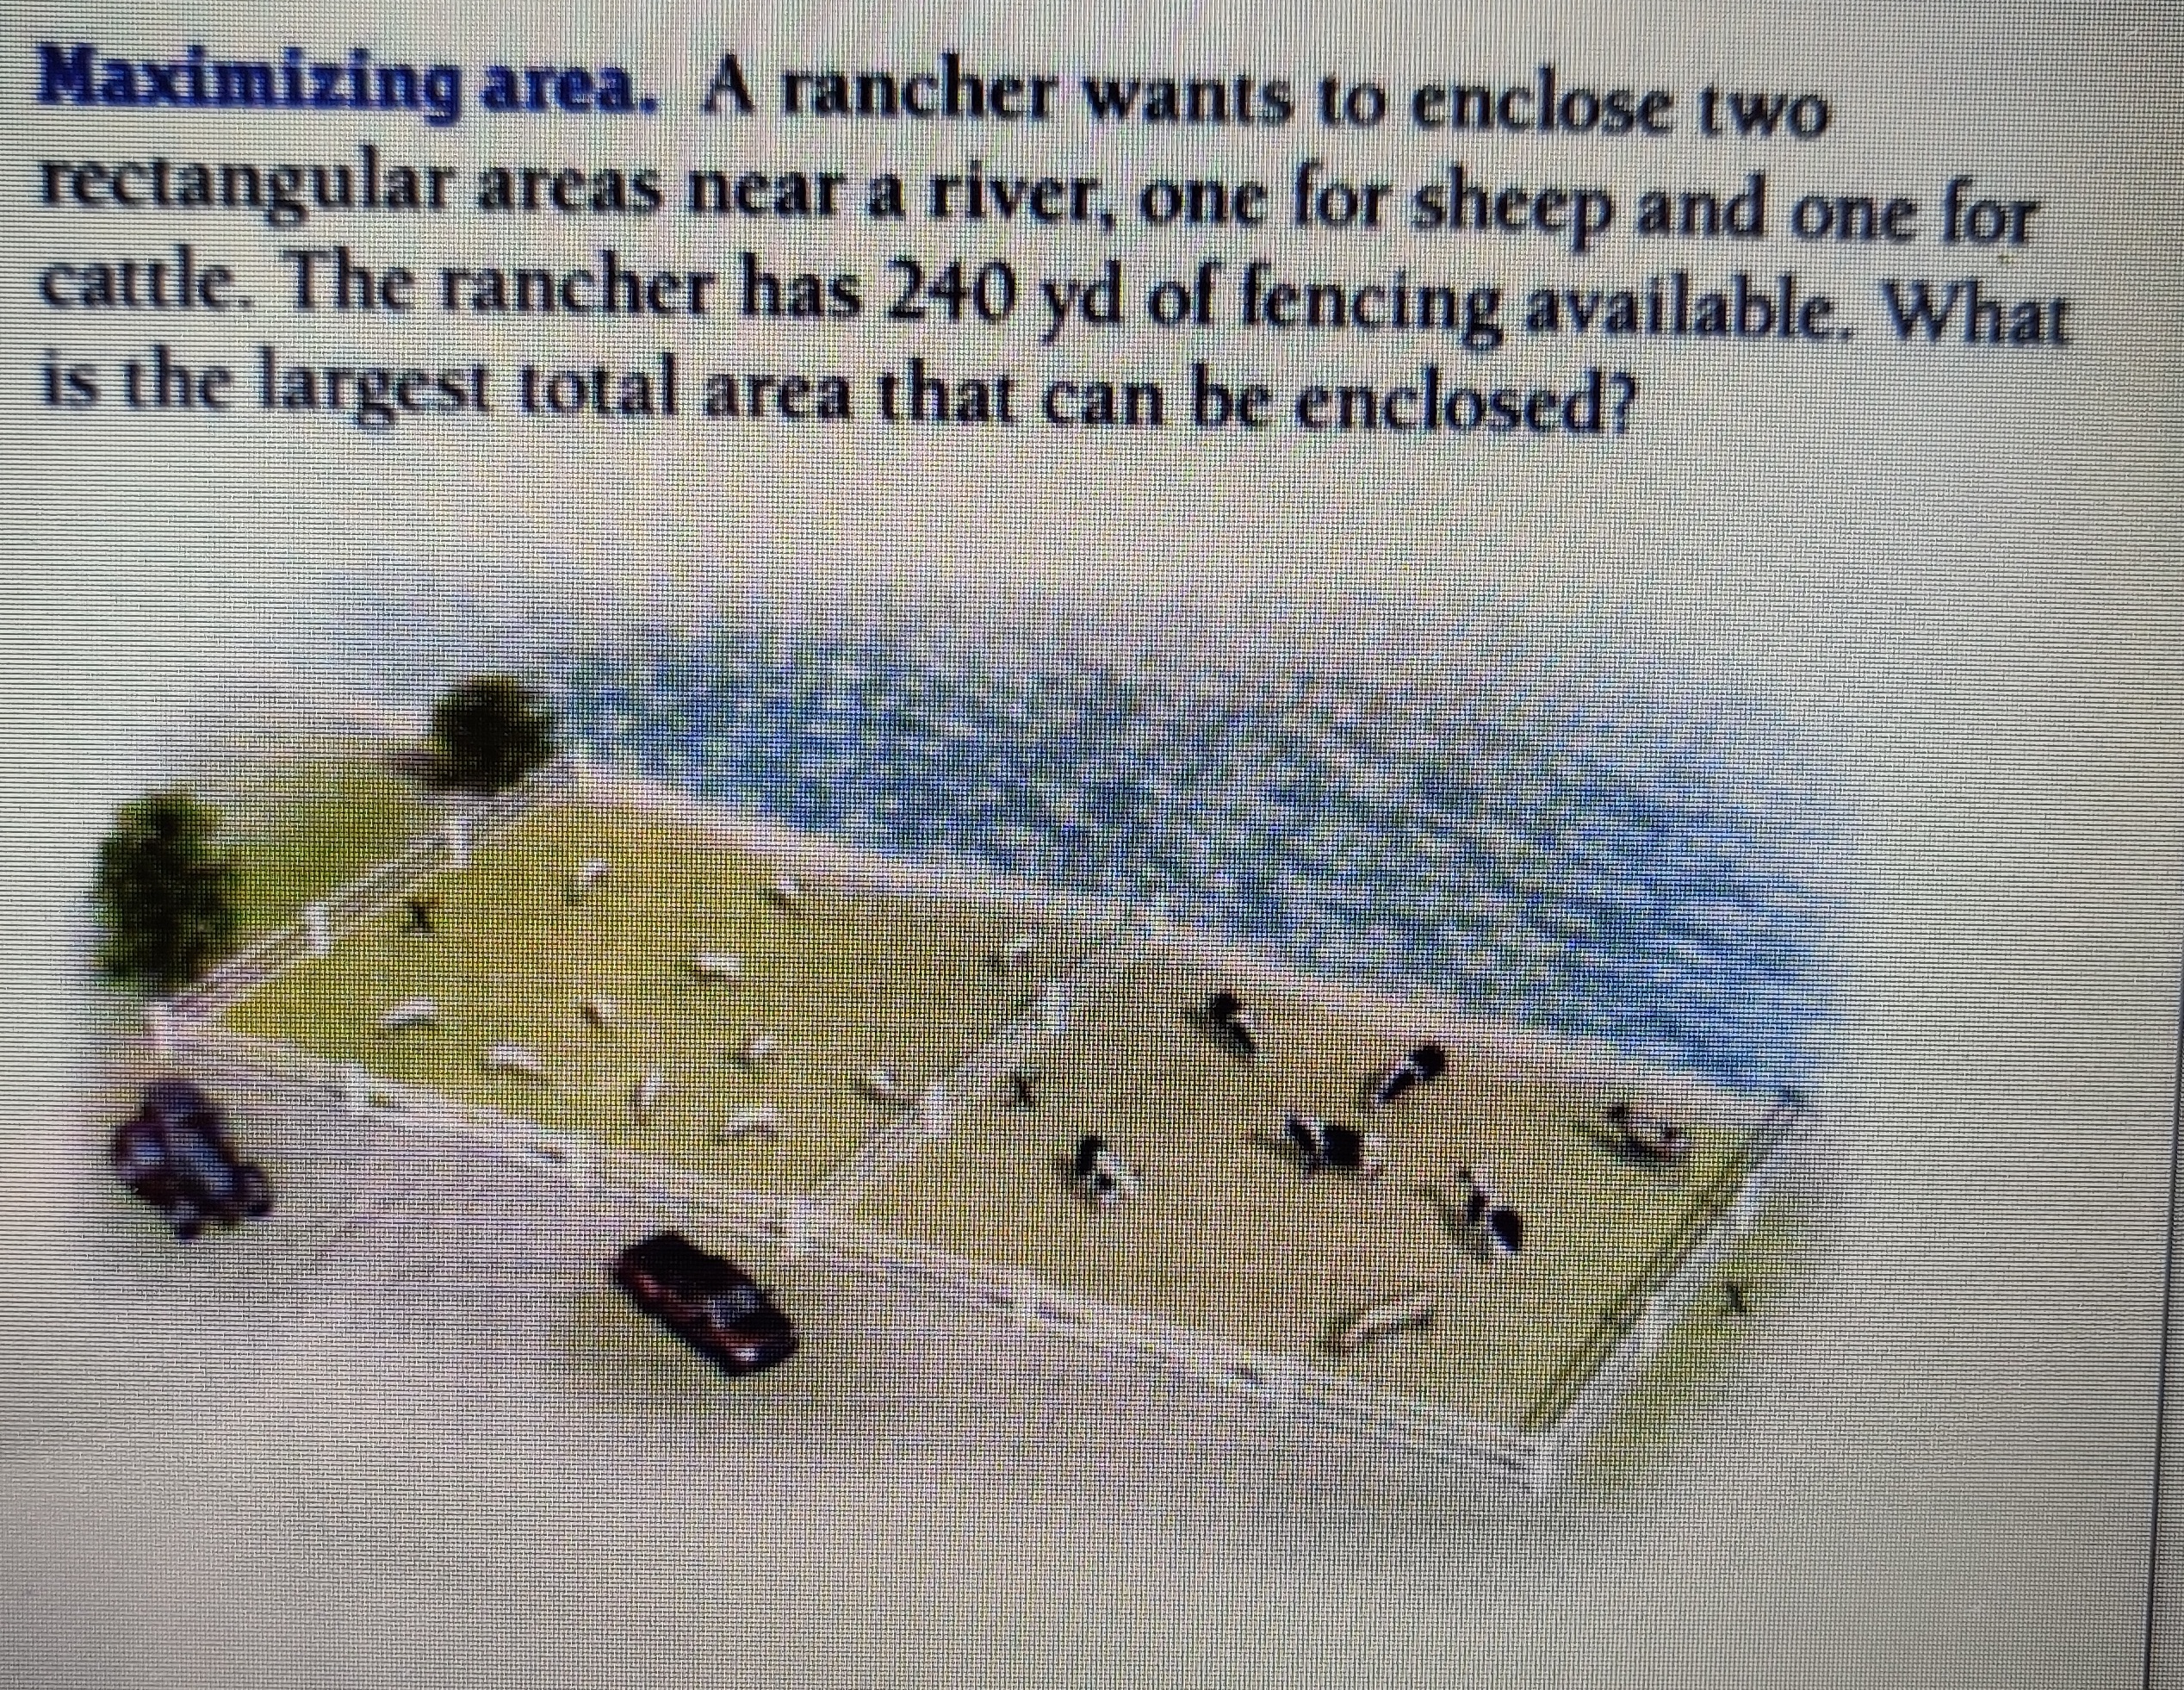 Maximizing area. A rancher wants to enclose two
rectangular areas near a river, one for sheep and one for
cattle. The rancher has 240 yd of fencing available. What
is the largest total area that can be enclosed?
